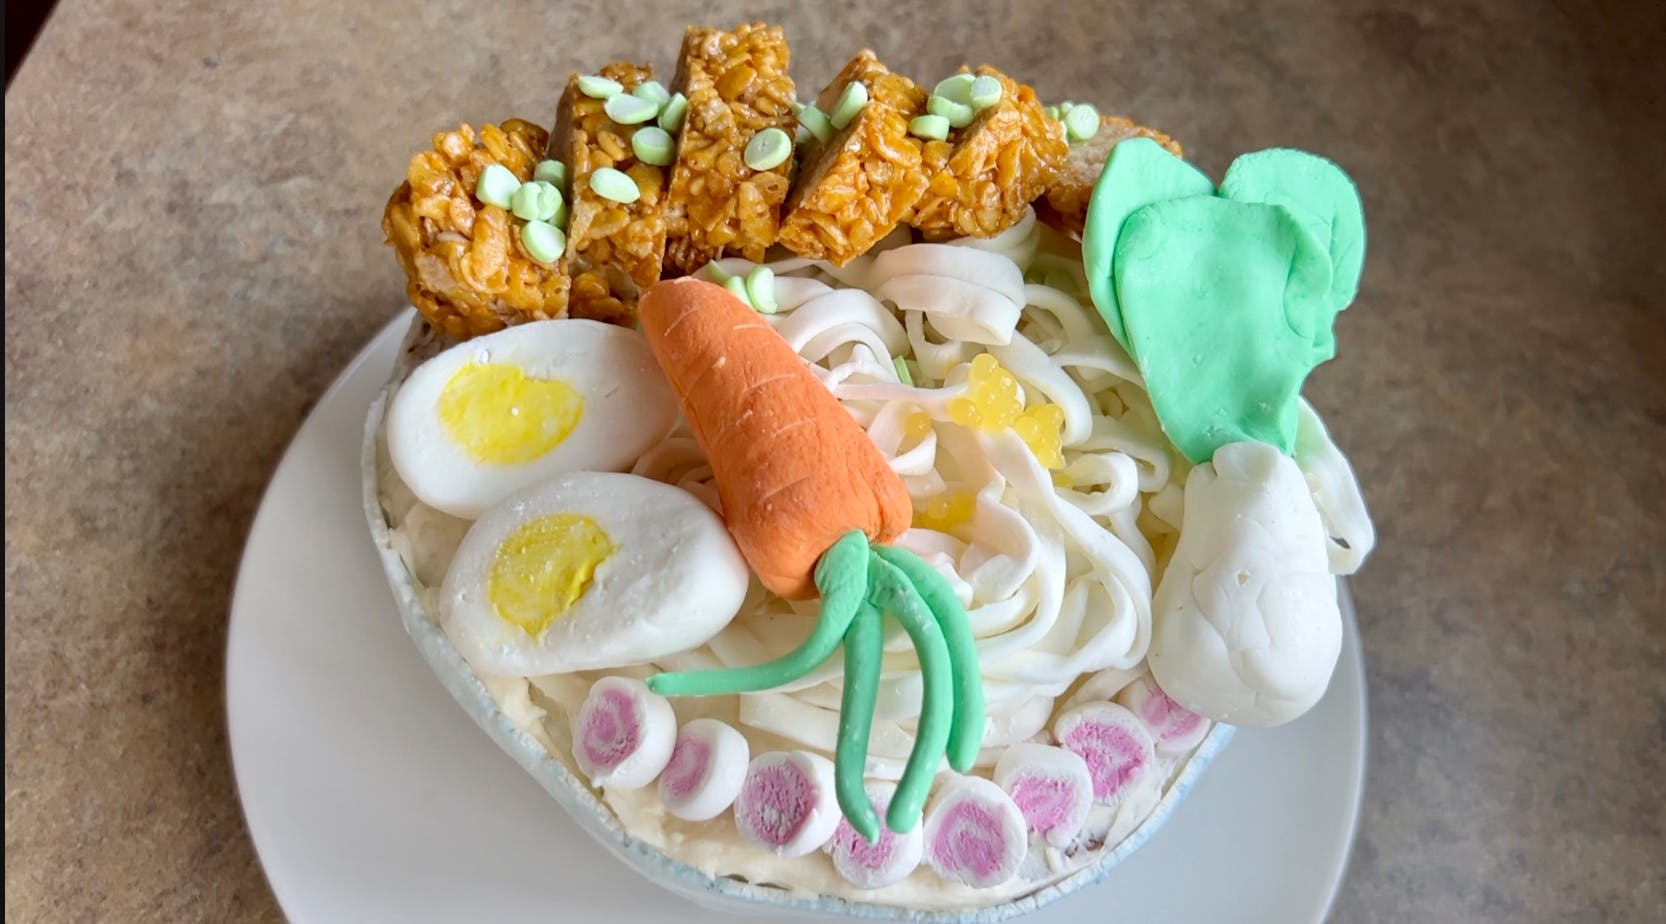 The completed ramen cake